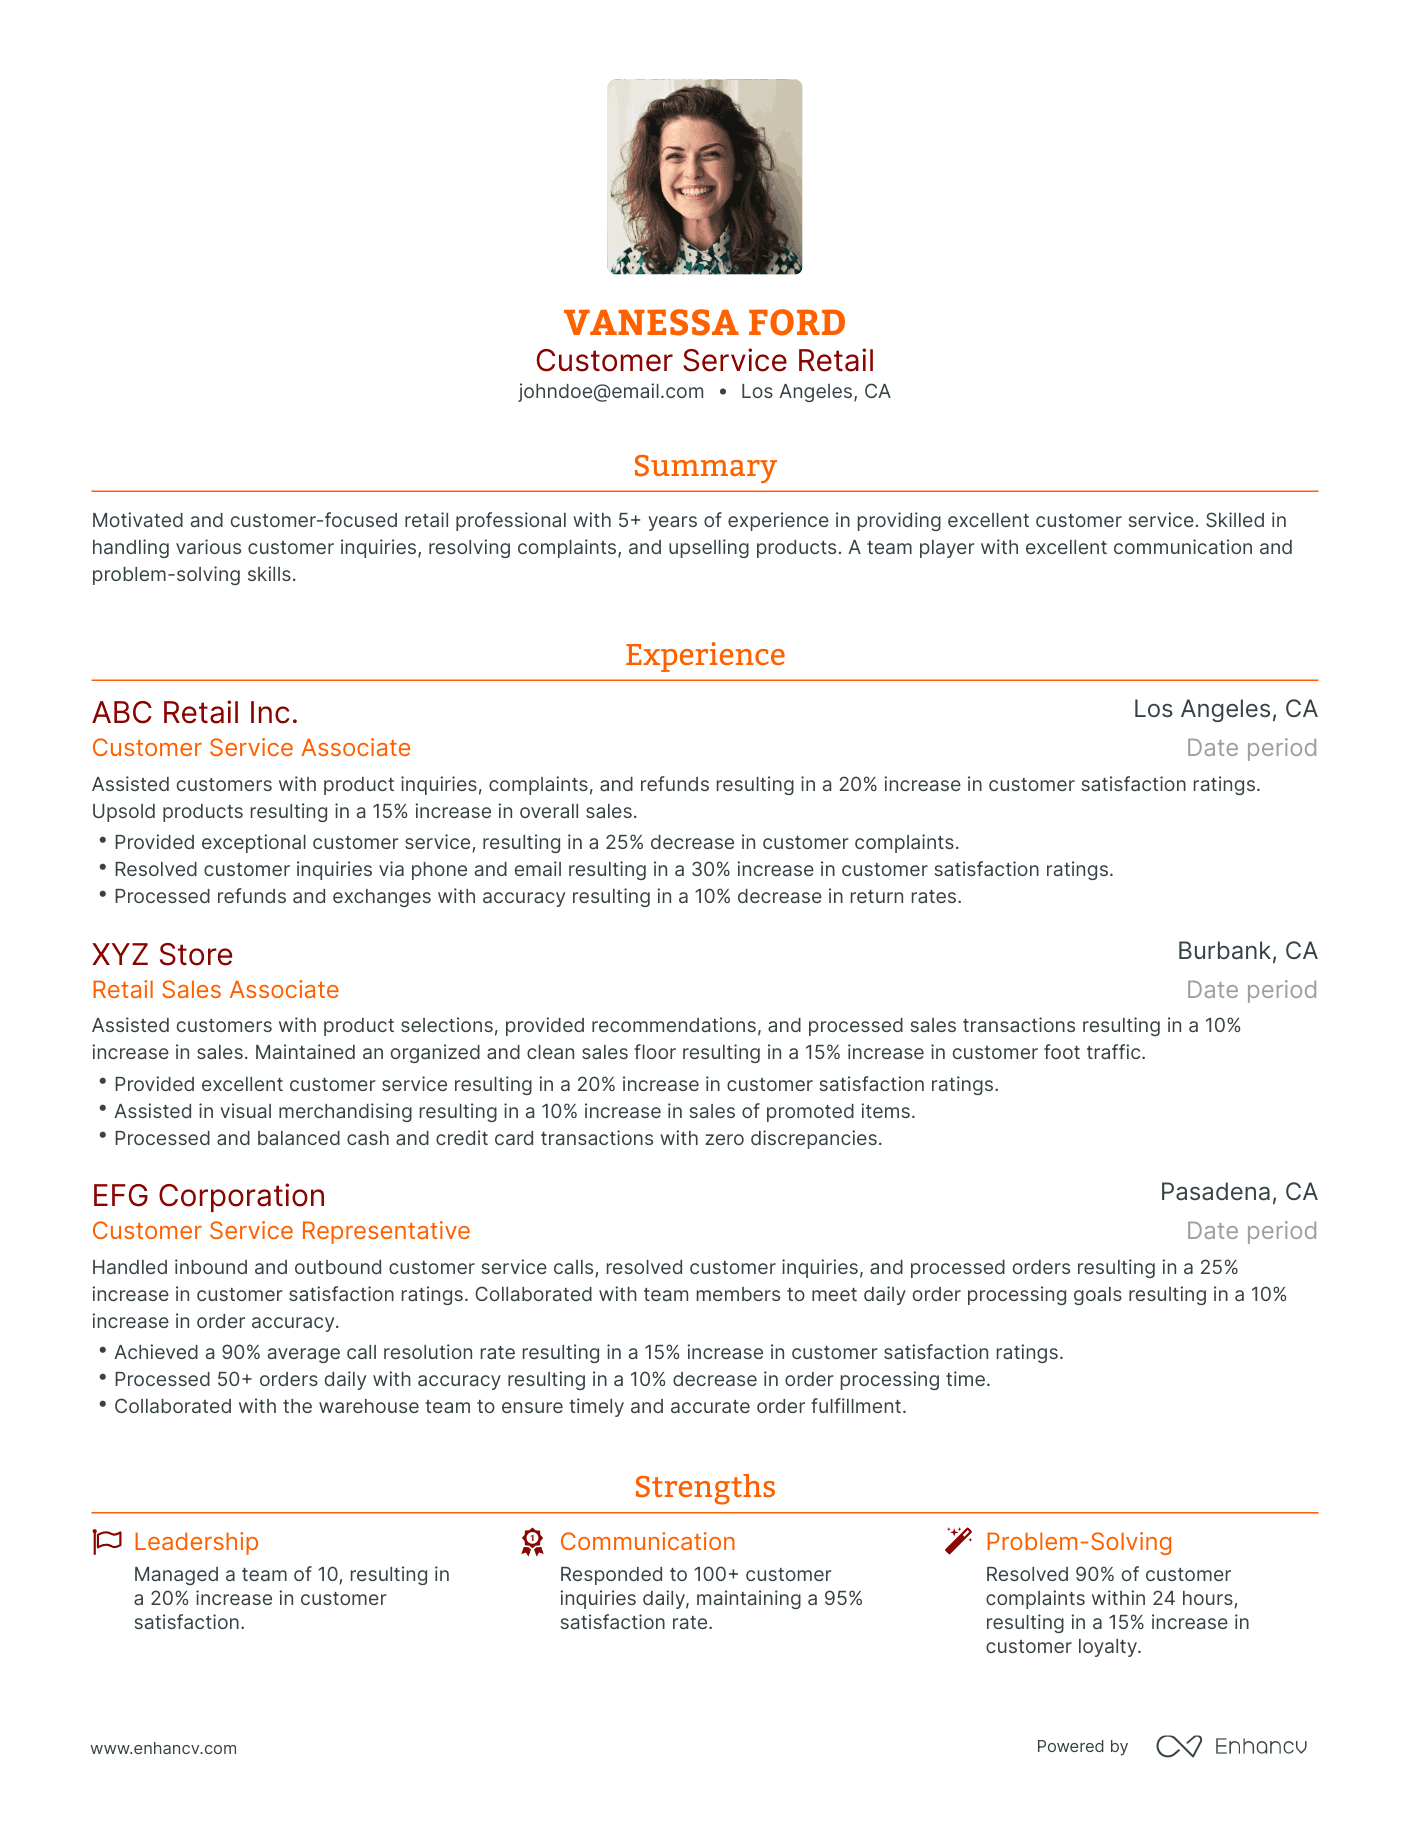 Traditional Customer Service Retail Resume Template